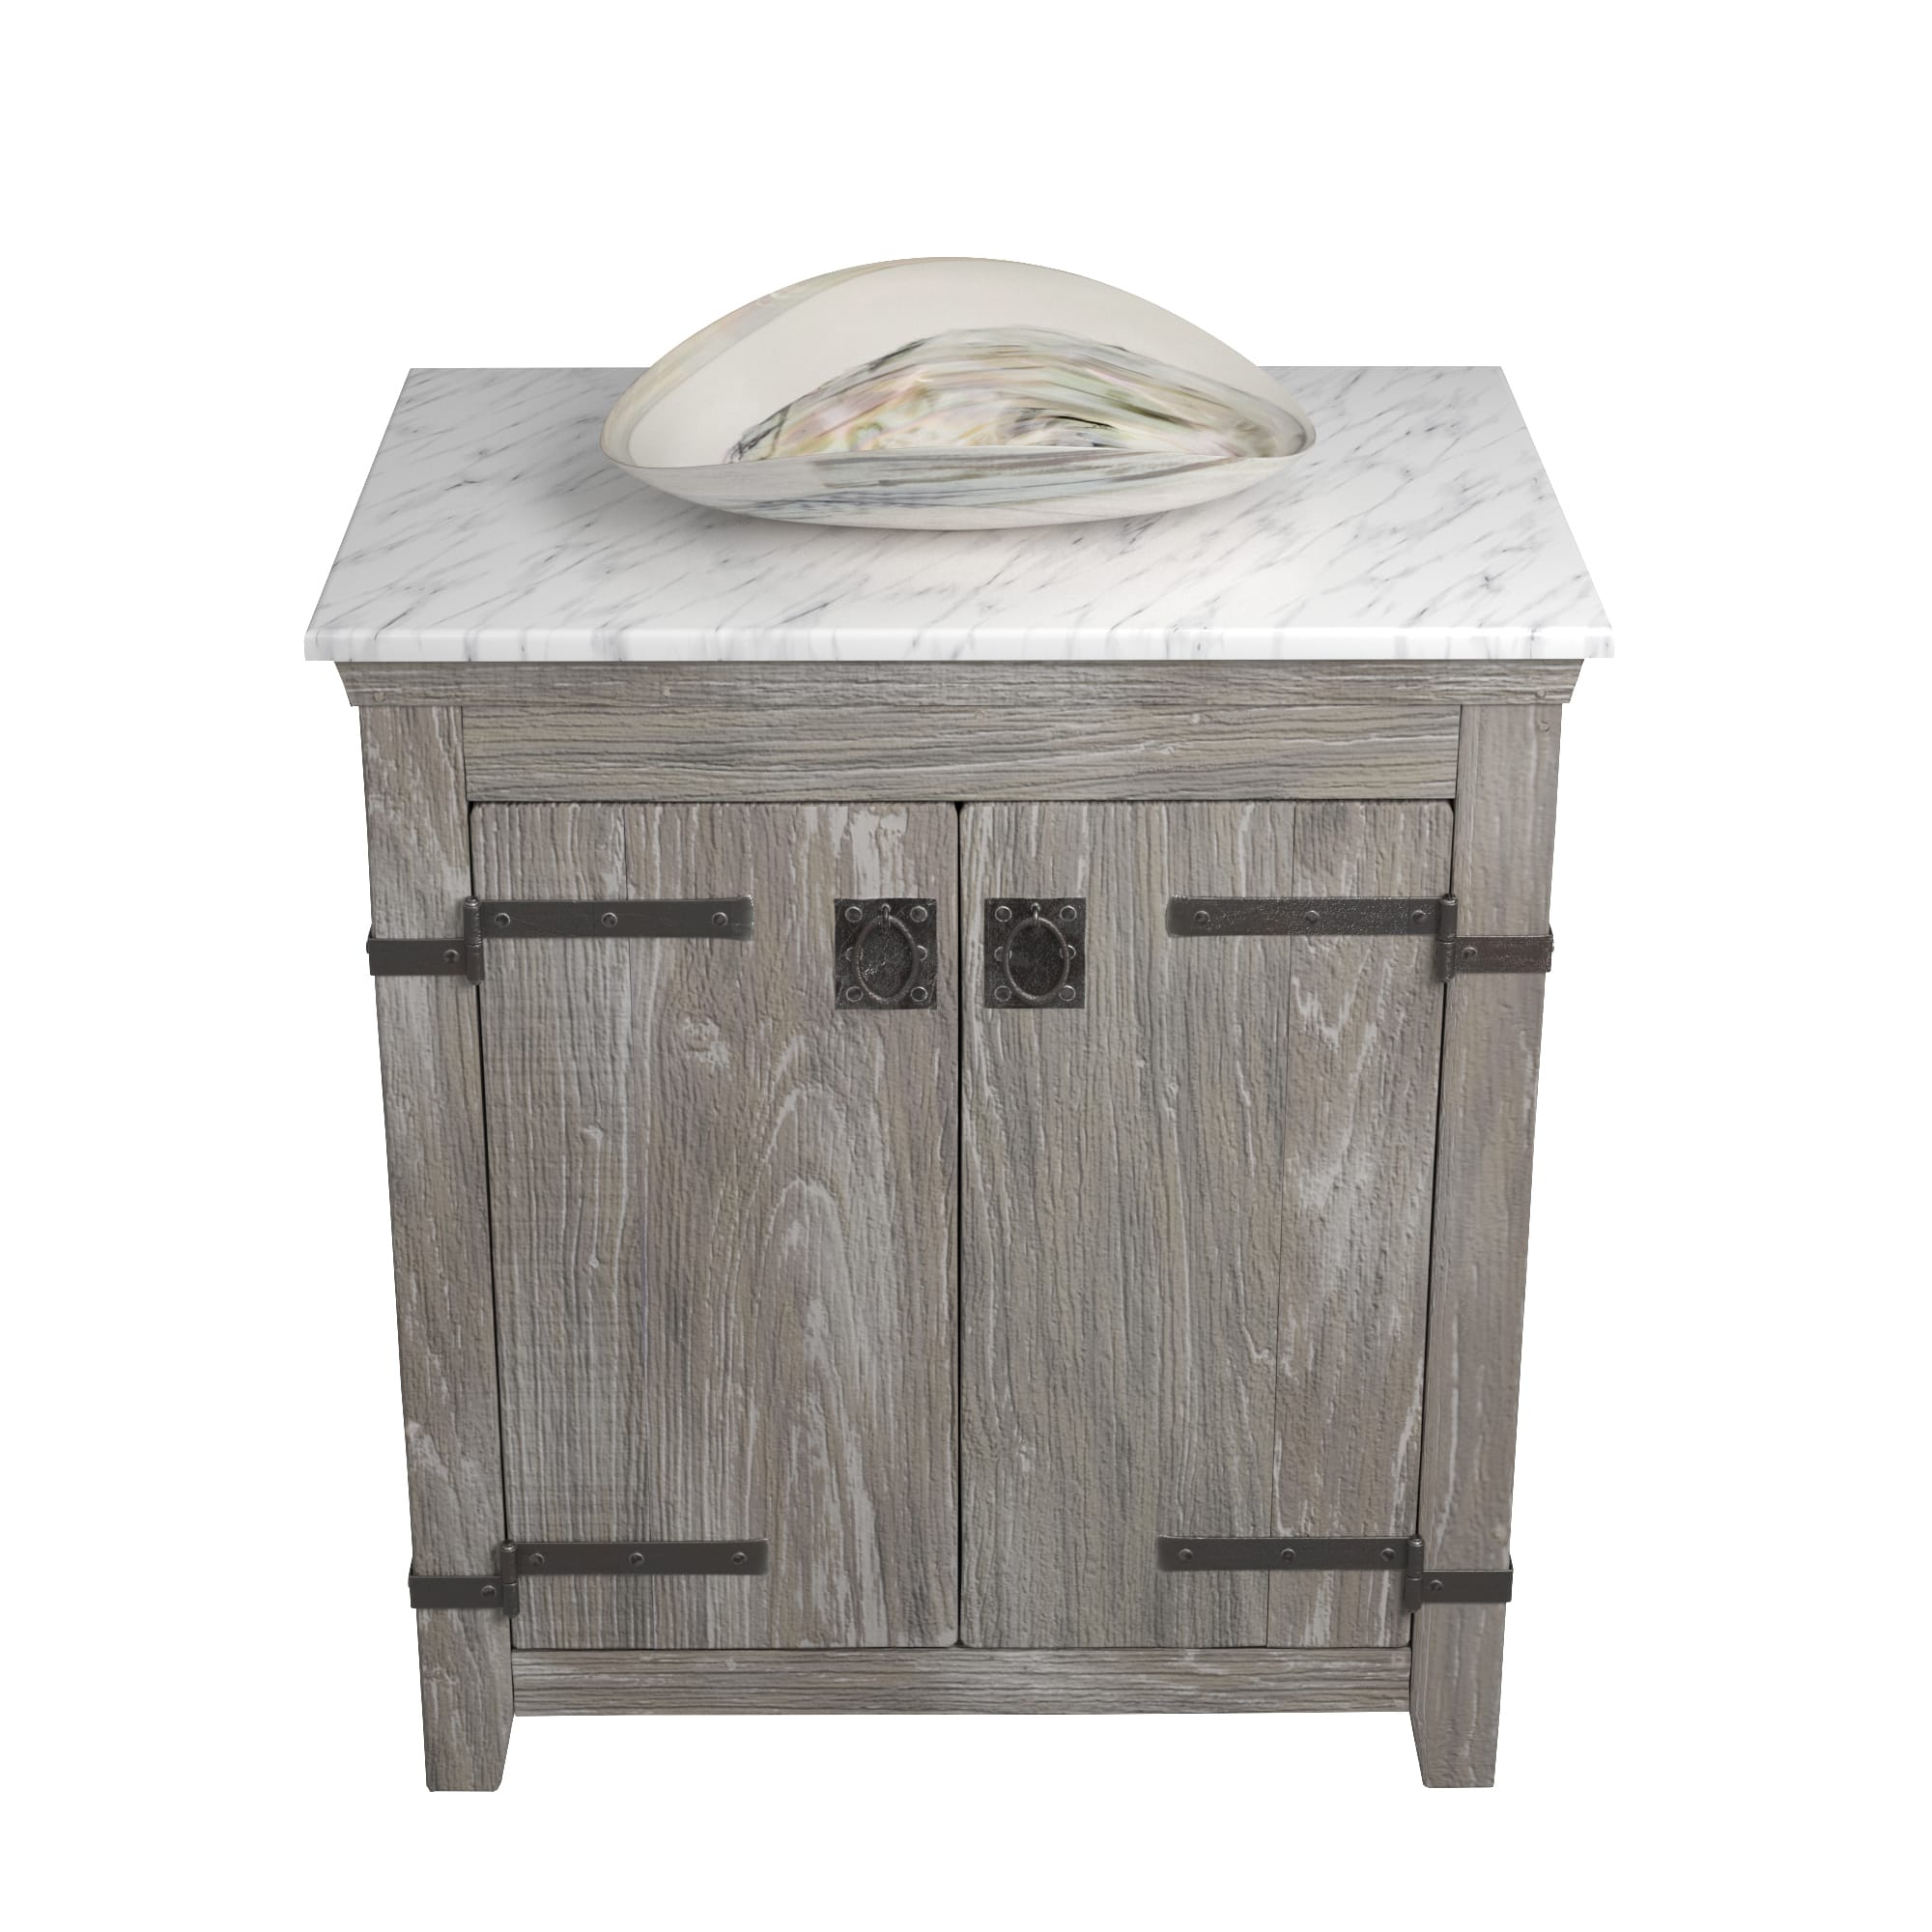 Native Trails 30" Americana Vanity in Driftwood with Carrara Marble Top and Sorrento in Abalone, No Faucet Hole, BND30-VB-CT-MG-096